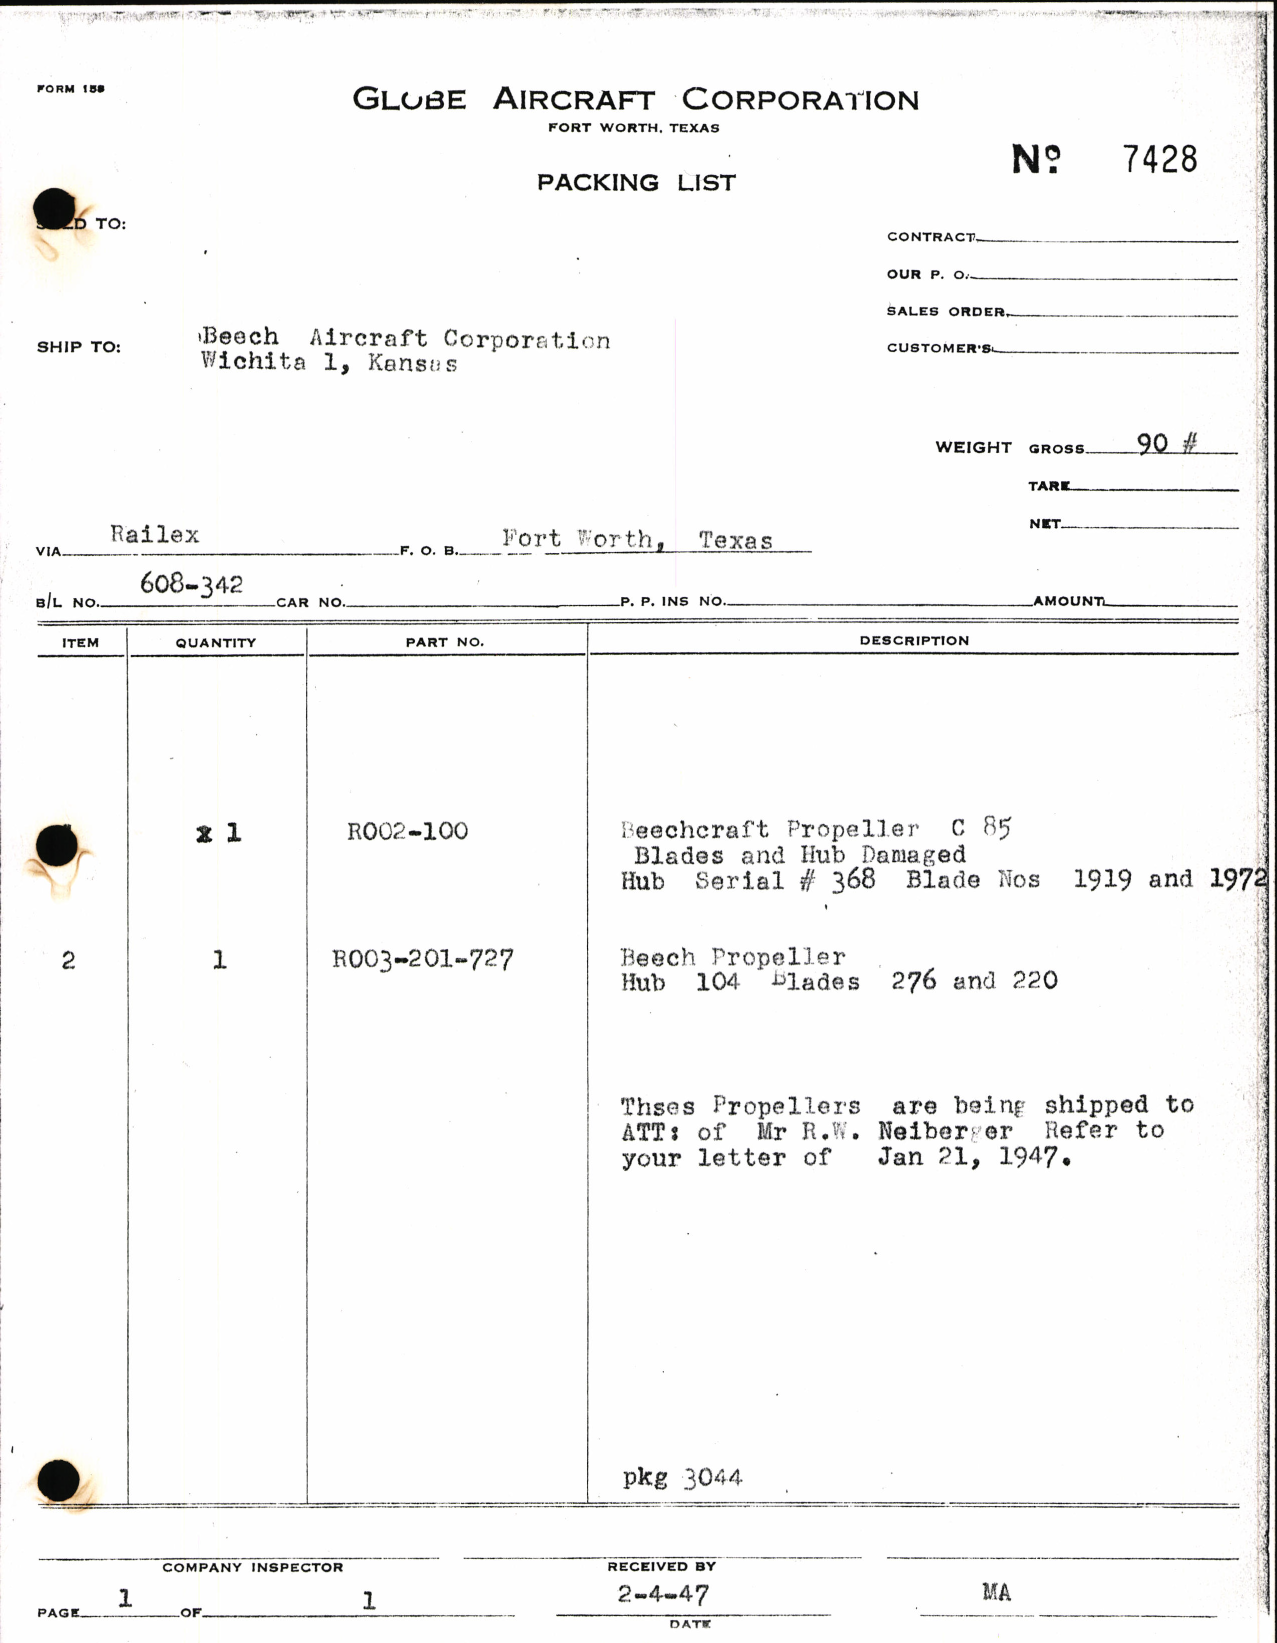 Sample page 6 from AirCorps Library document: Roby Beech Propeller Information